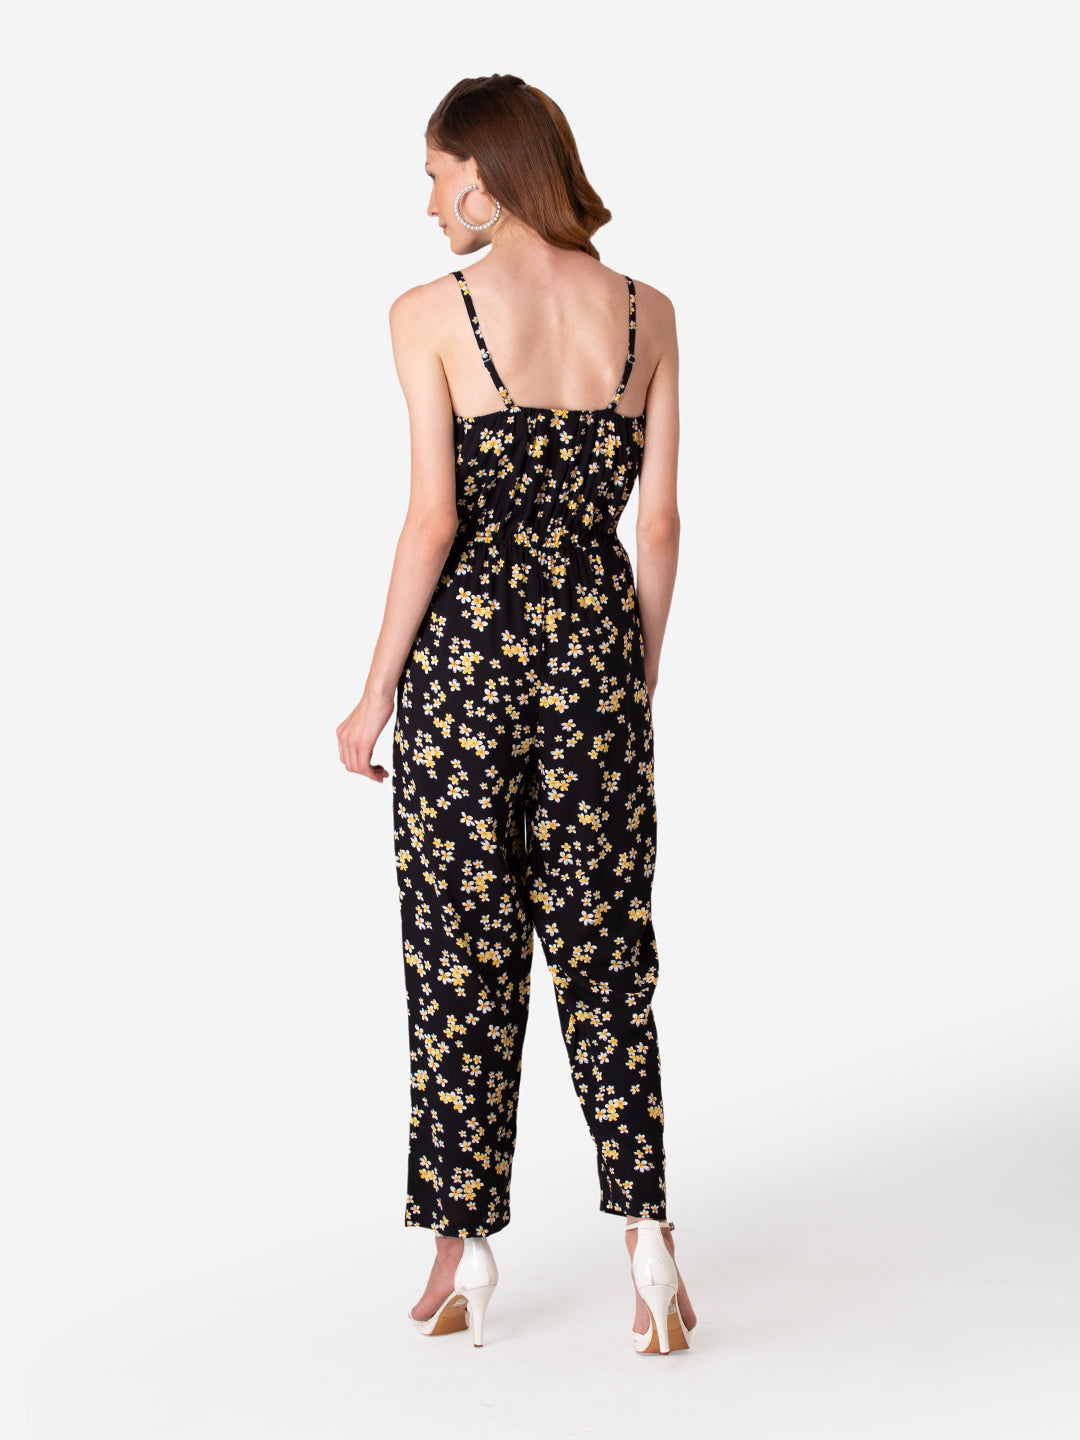 How to Wear Jumpsuits ? 16 Outfits & Styling Tips | Floral jumpsuit outfit,  Pretty jumpsuits, Fashion